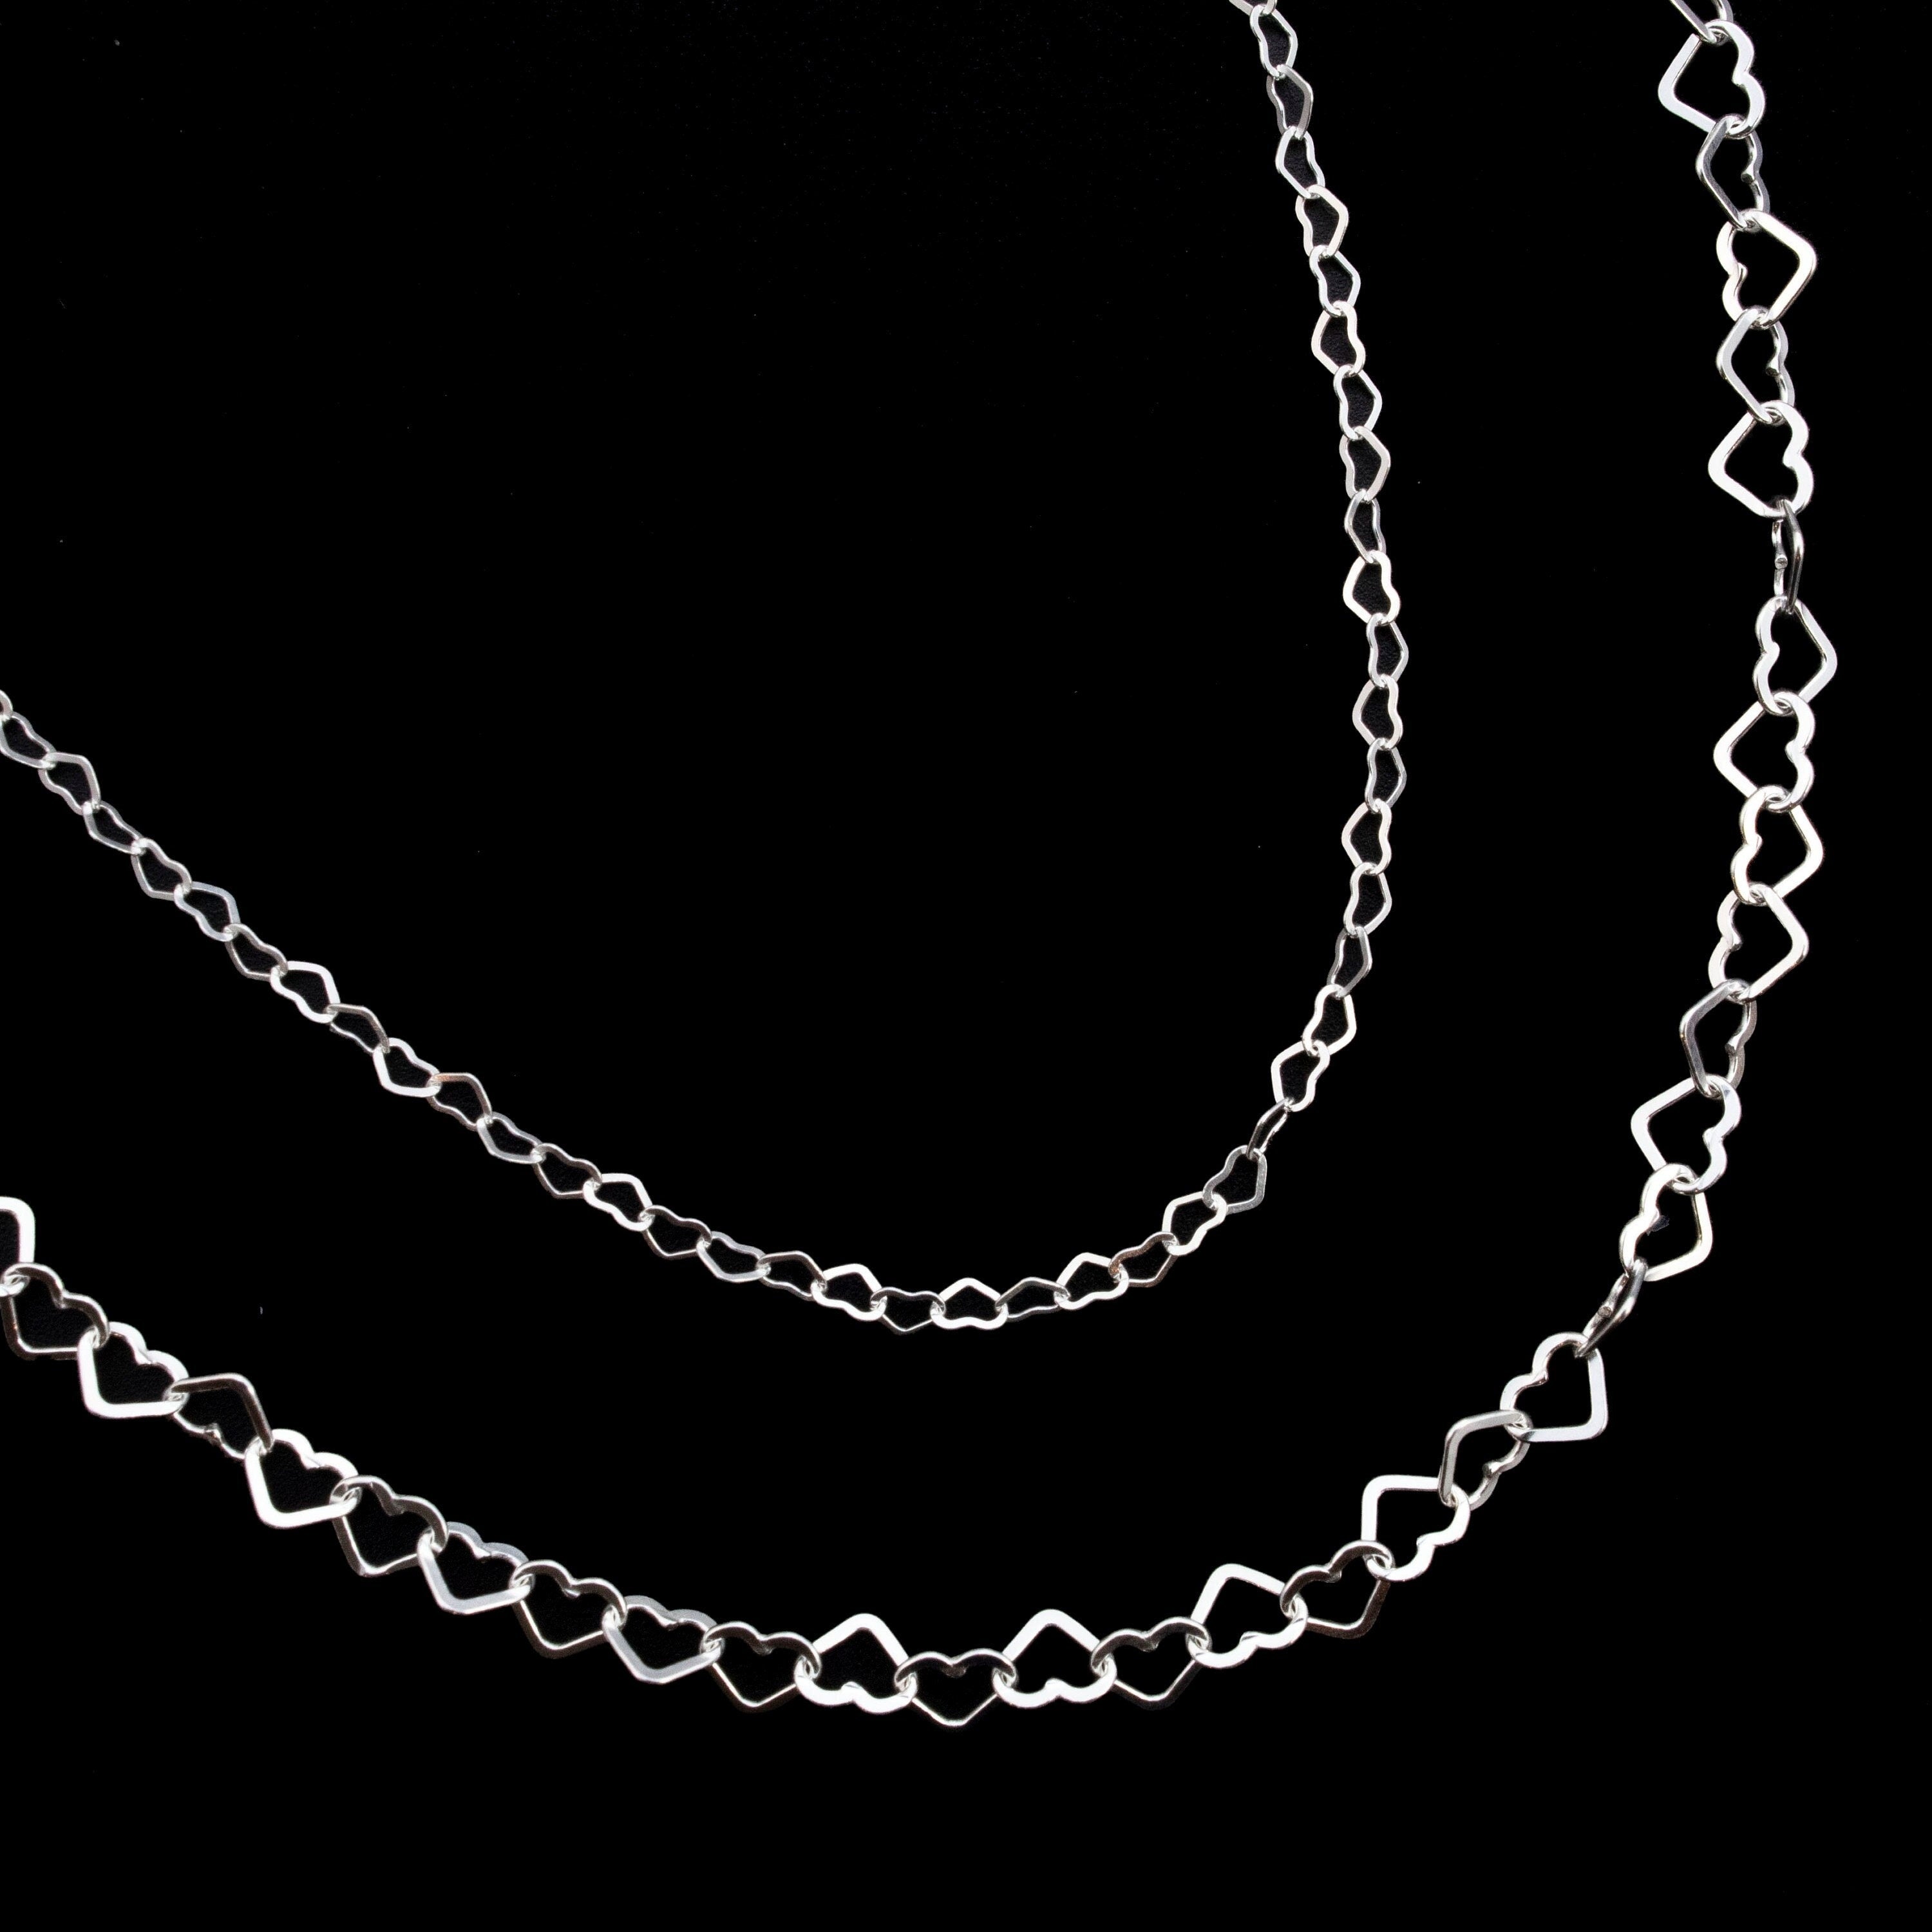 SOLID 14k Gold Heart Link Chain Necklace 3.5mm Chain 16,18,20,22,24  WHOLESALE PRICE - Etsy